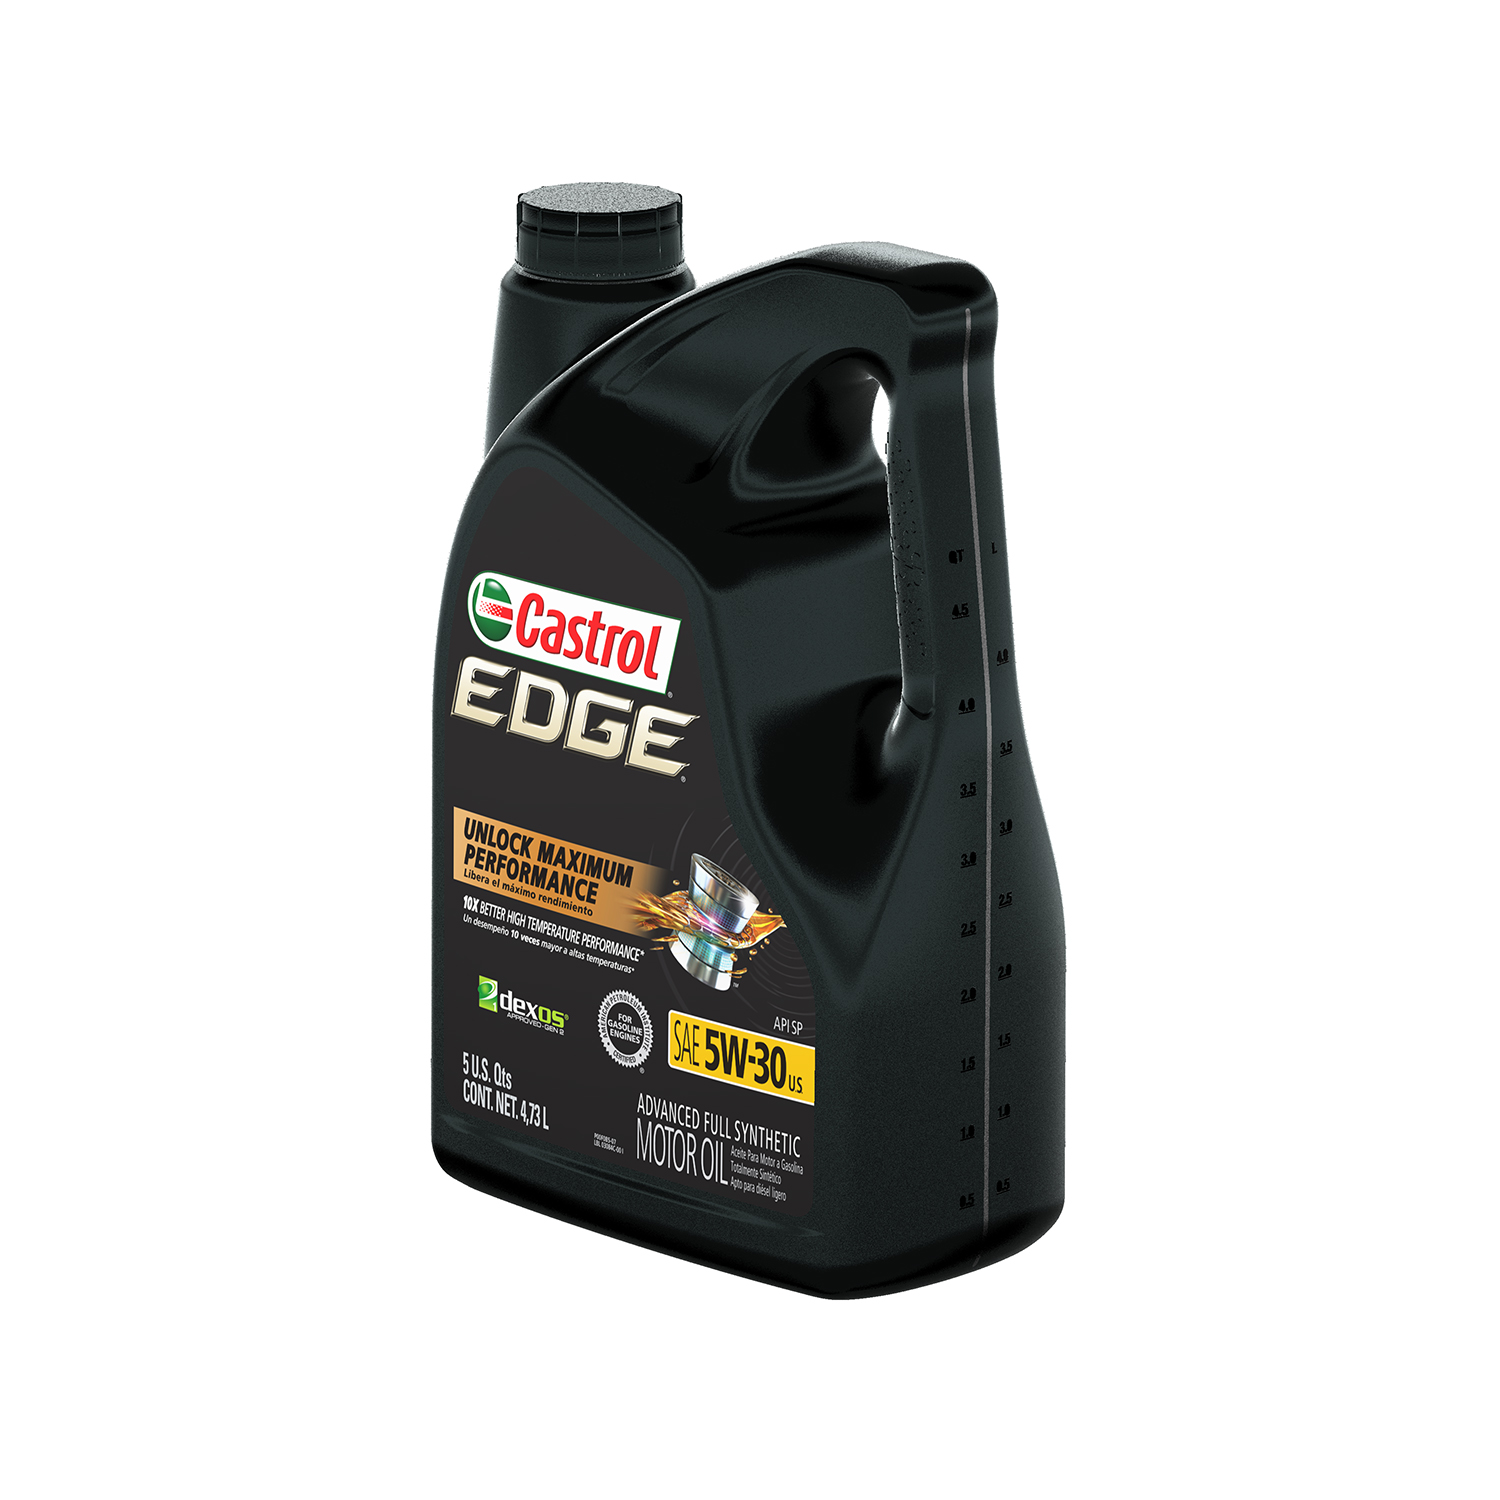 Castrol Edge 5W30 LL Full Synthetic Engine Oil, Unit Pack Size